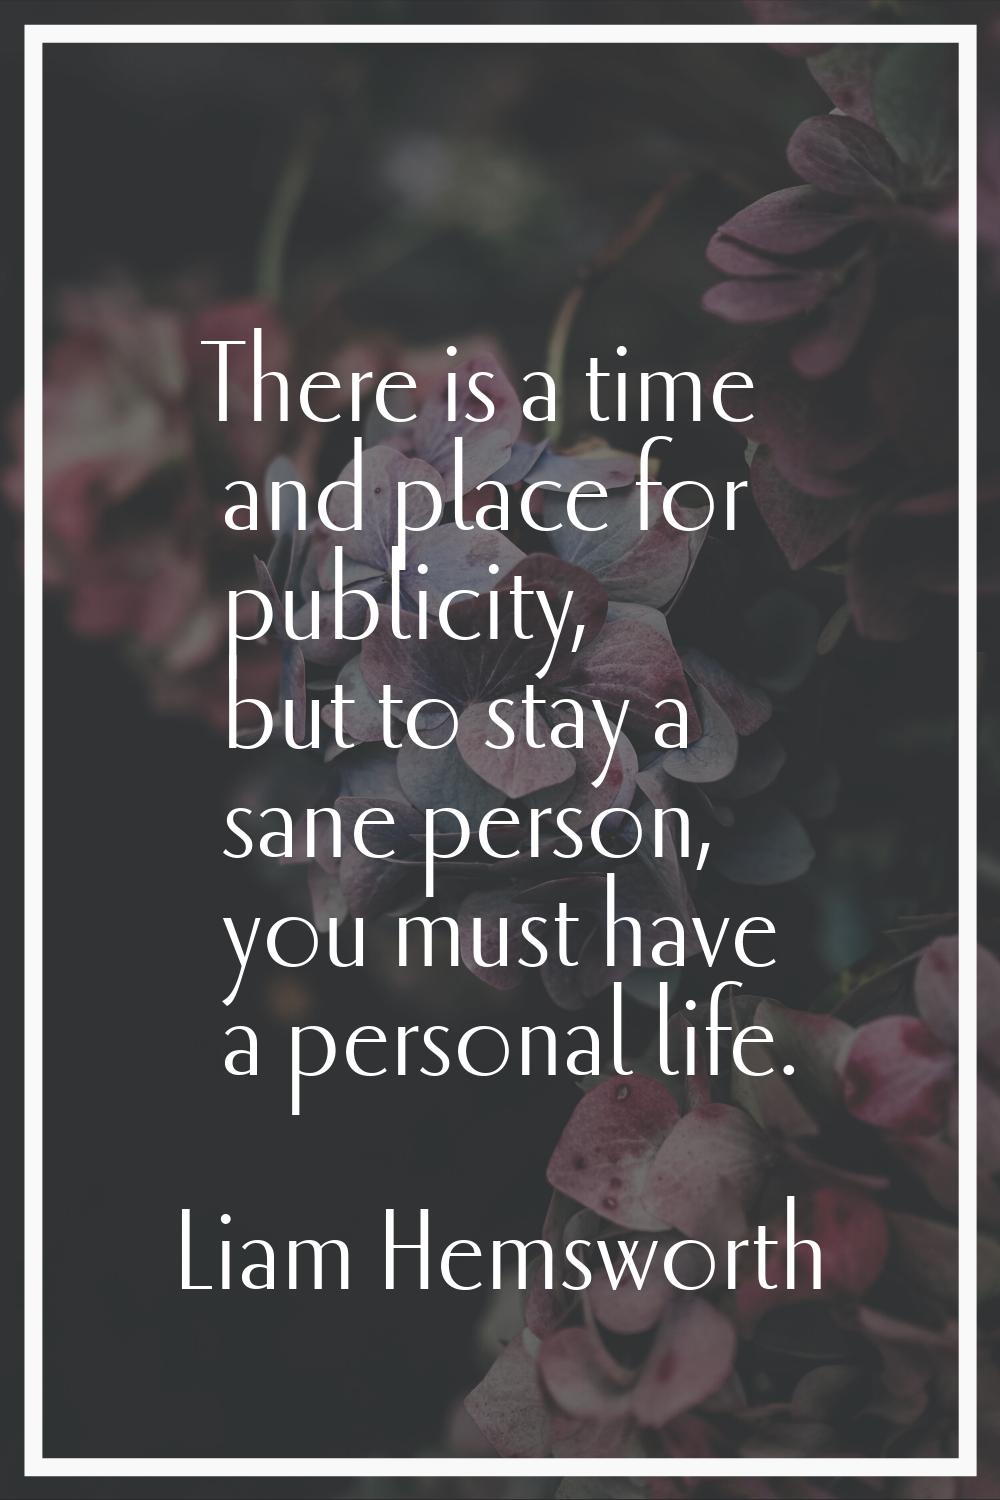 There is a time and place for publicity, but to stay a sane person, you must have a personal life.